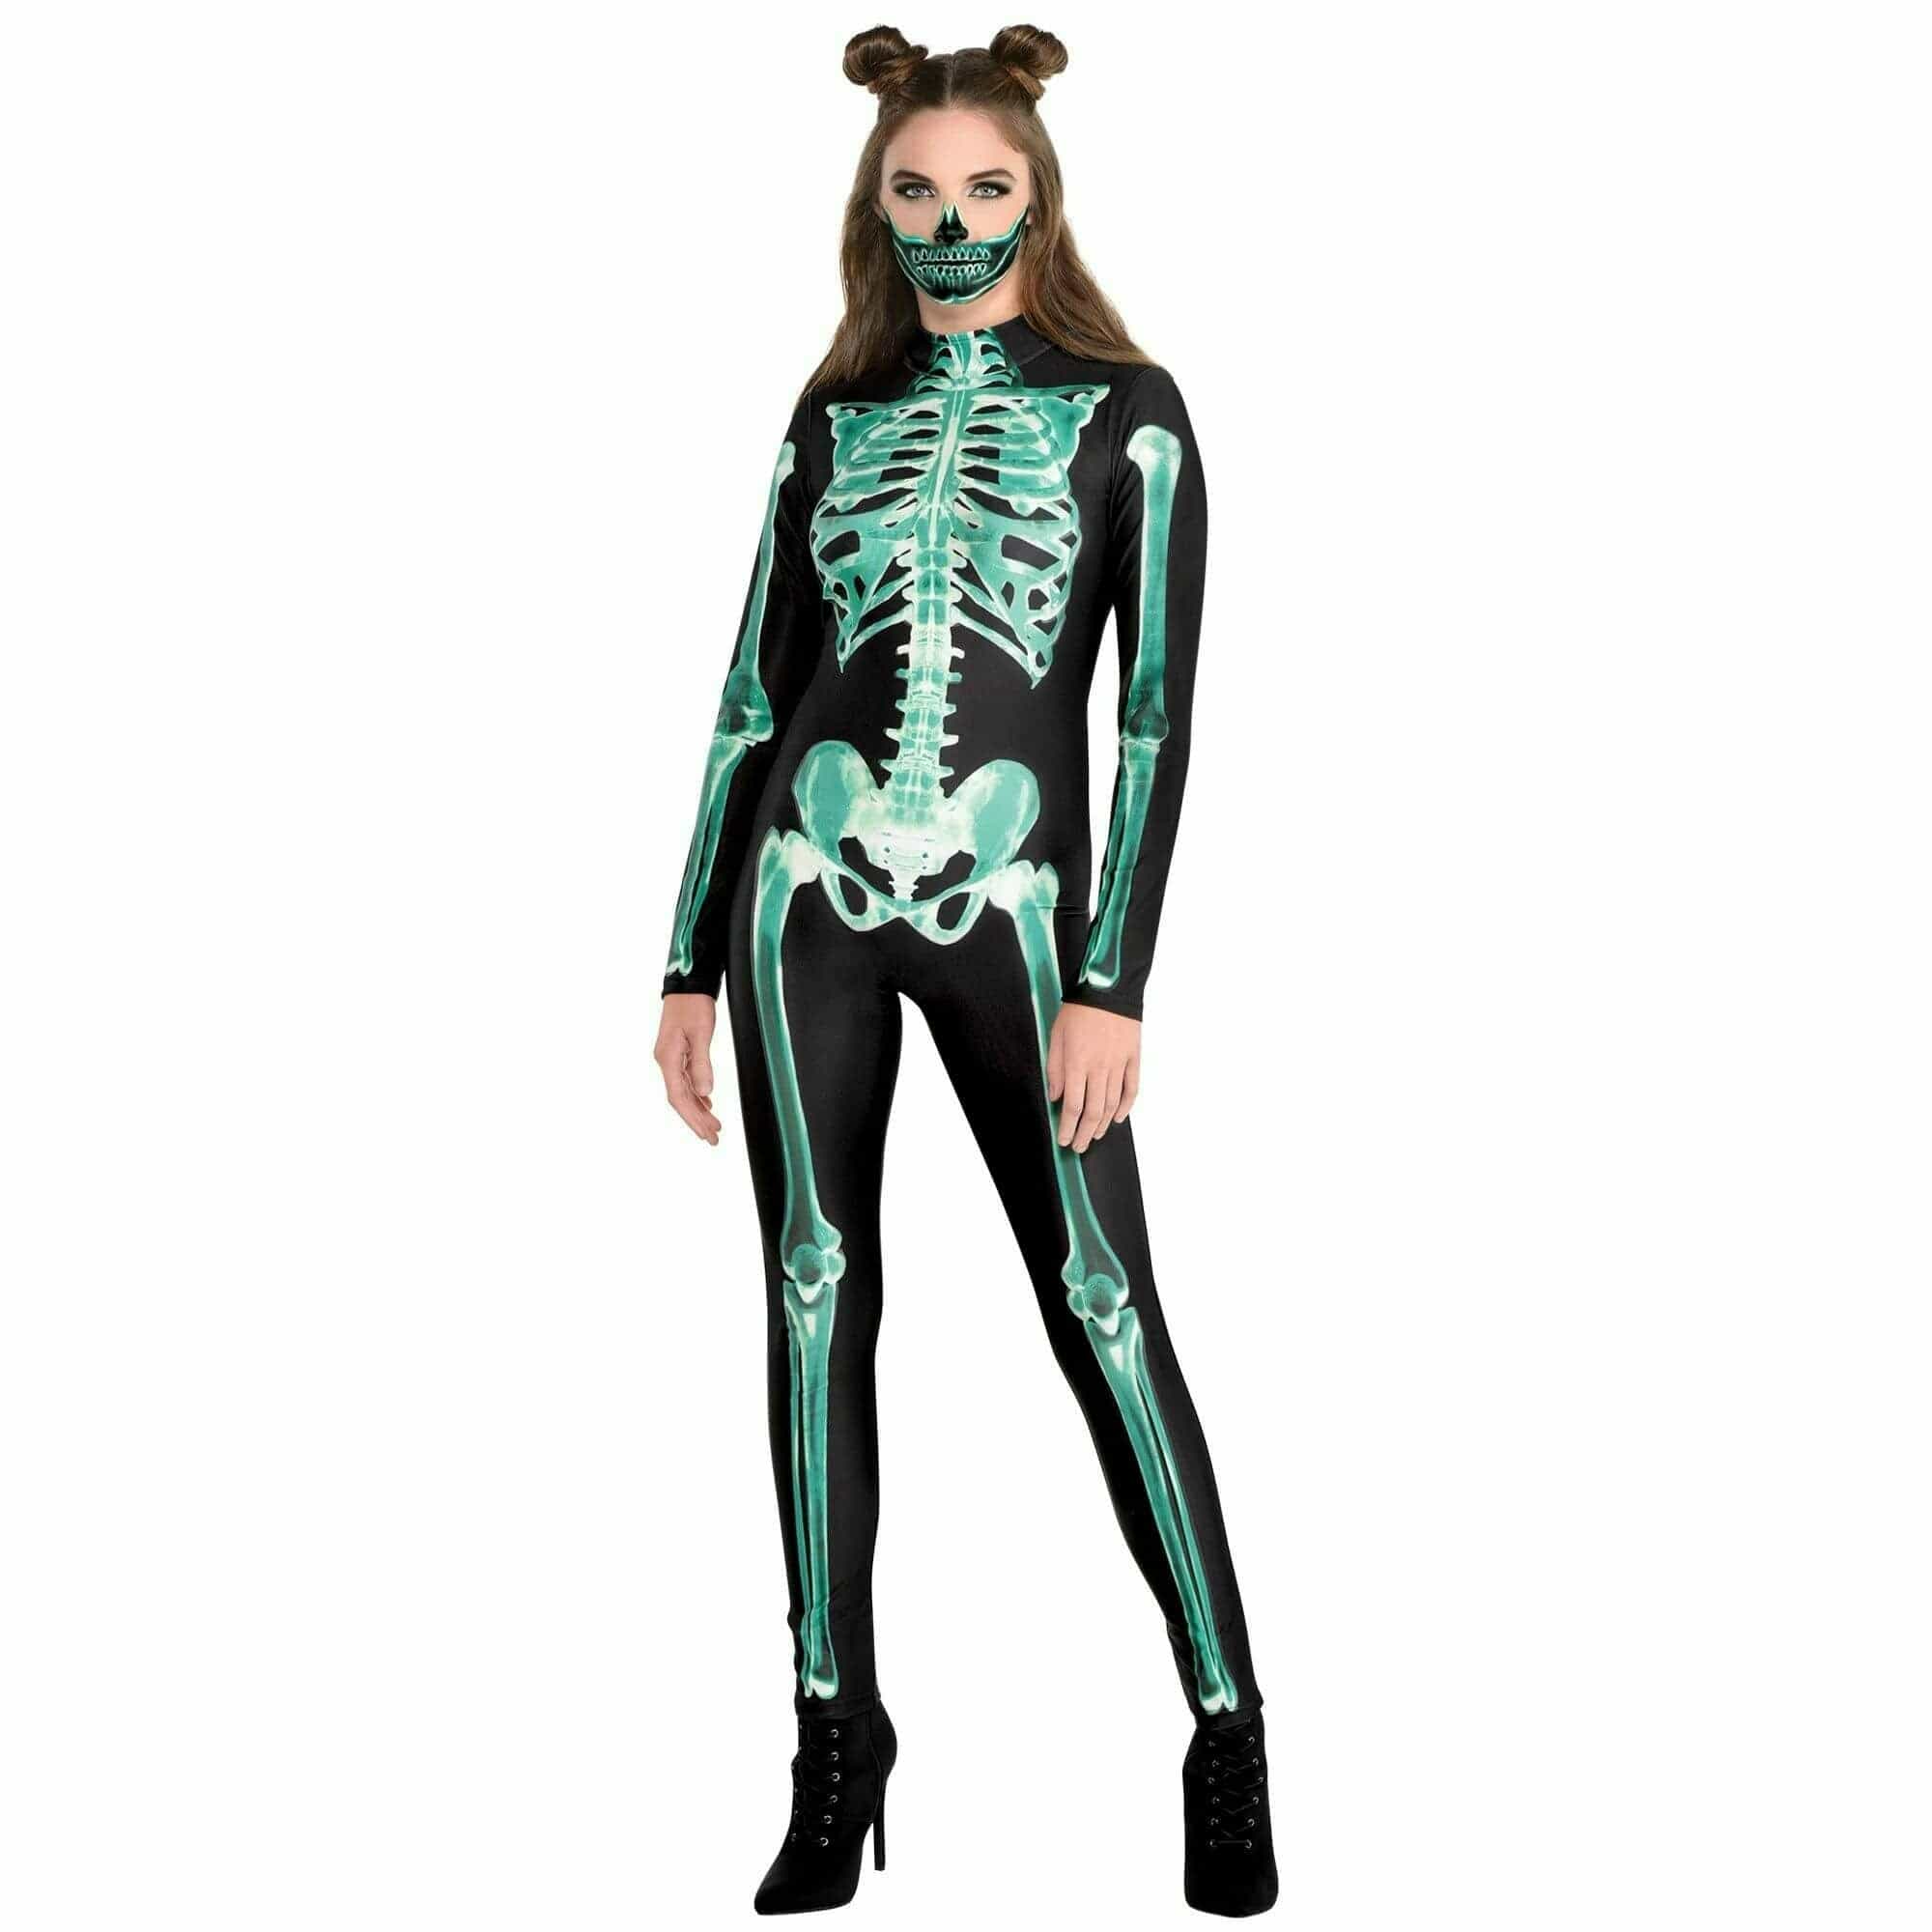 Amscan COSTUMES Large/ X-Large up to size 16 Skeleton Glow Catsuit Costume